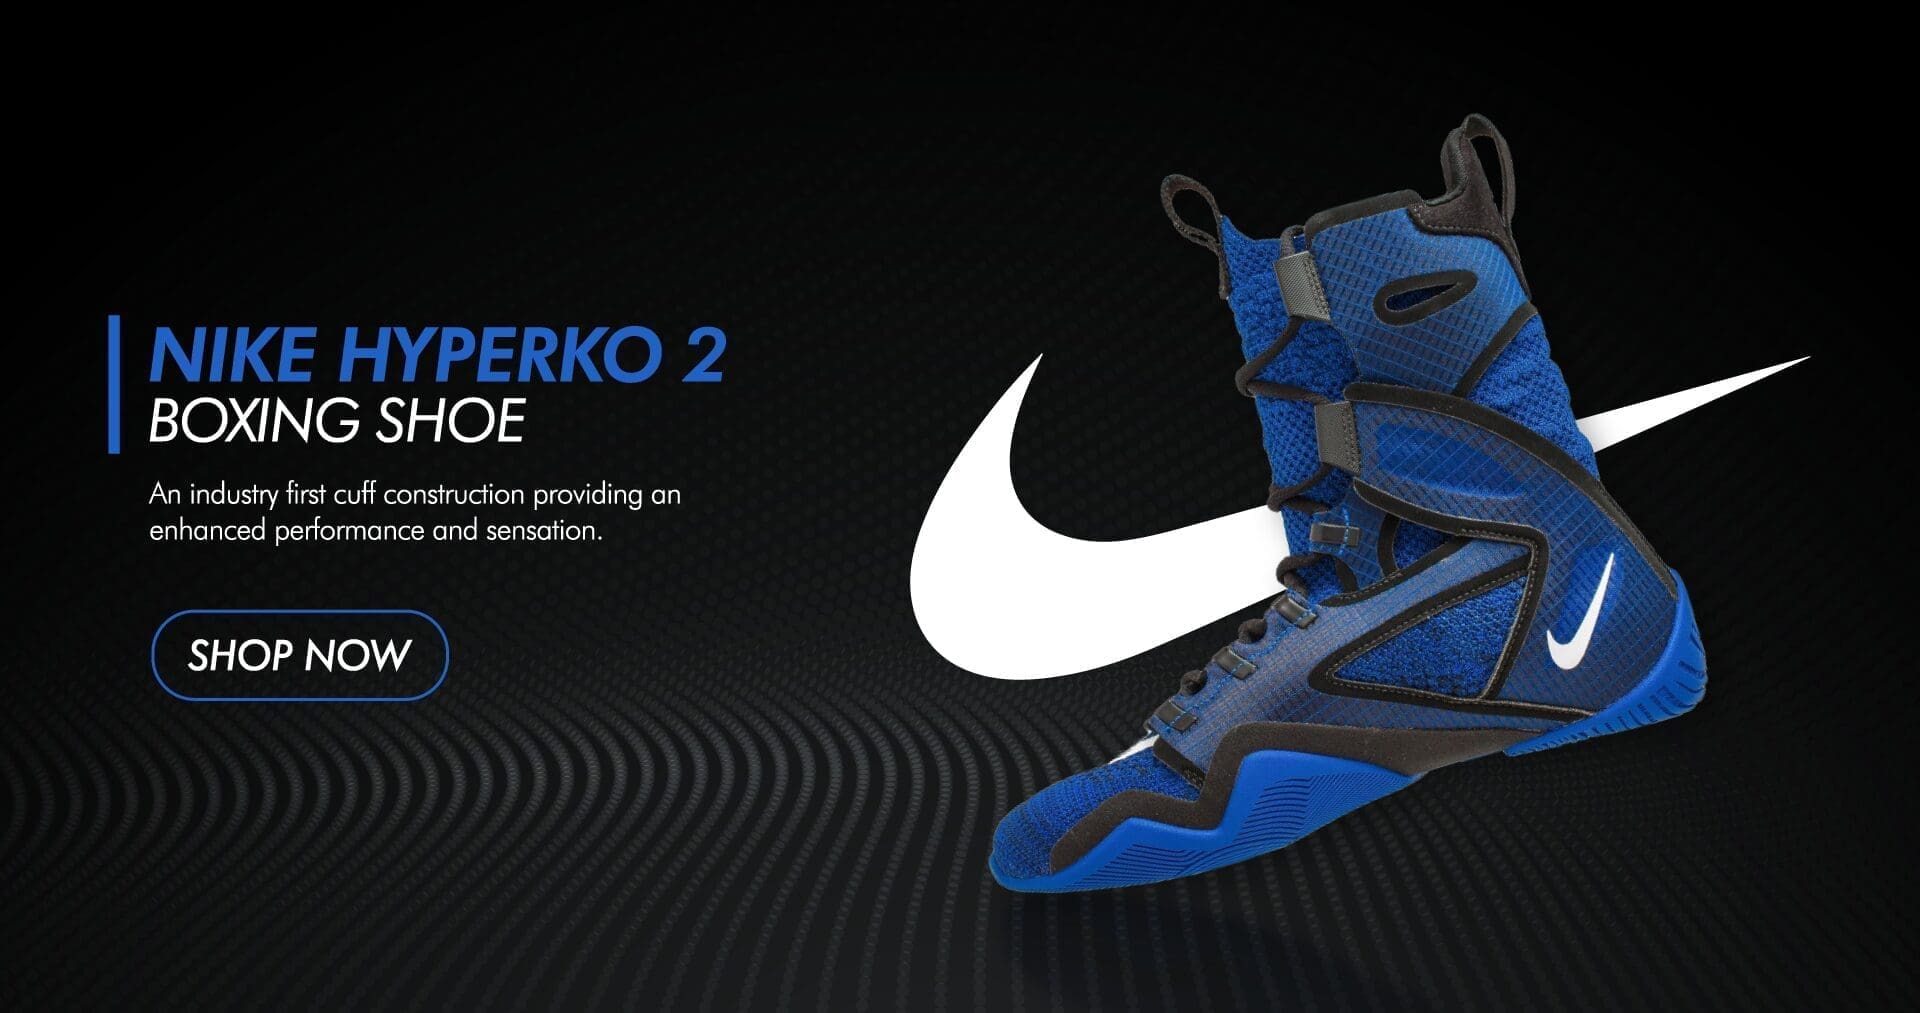 Introducing The Nike Hyper KO 2 Boxing Boots